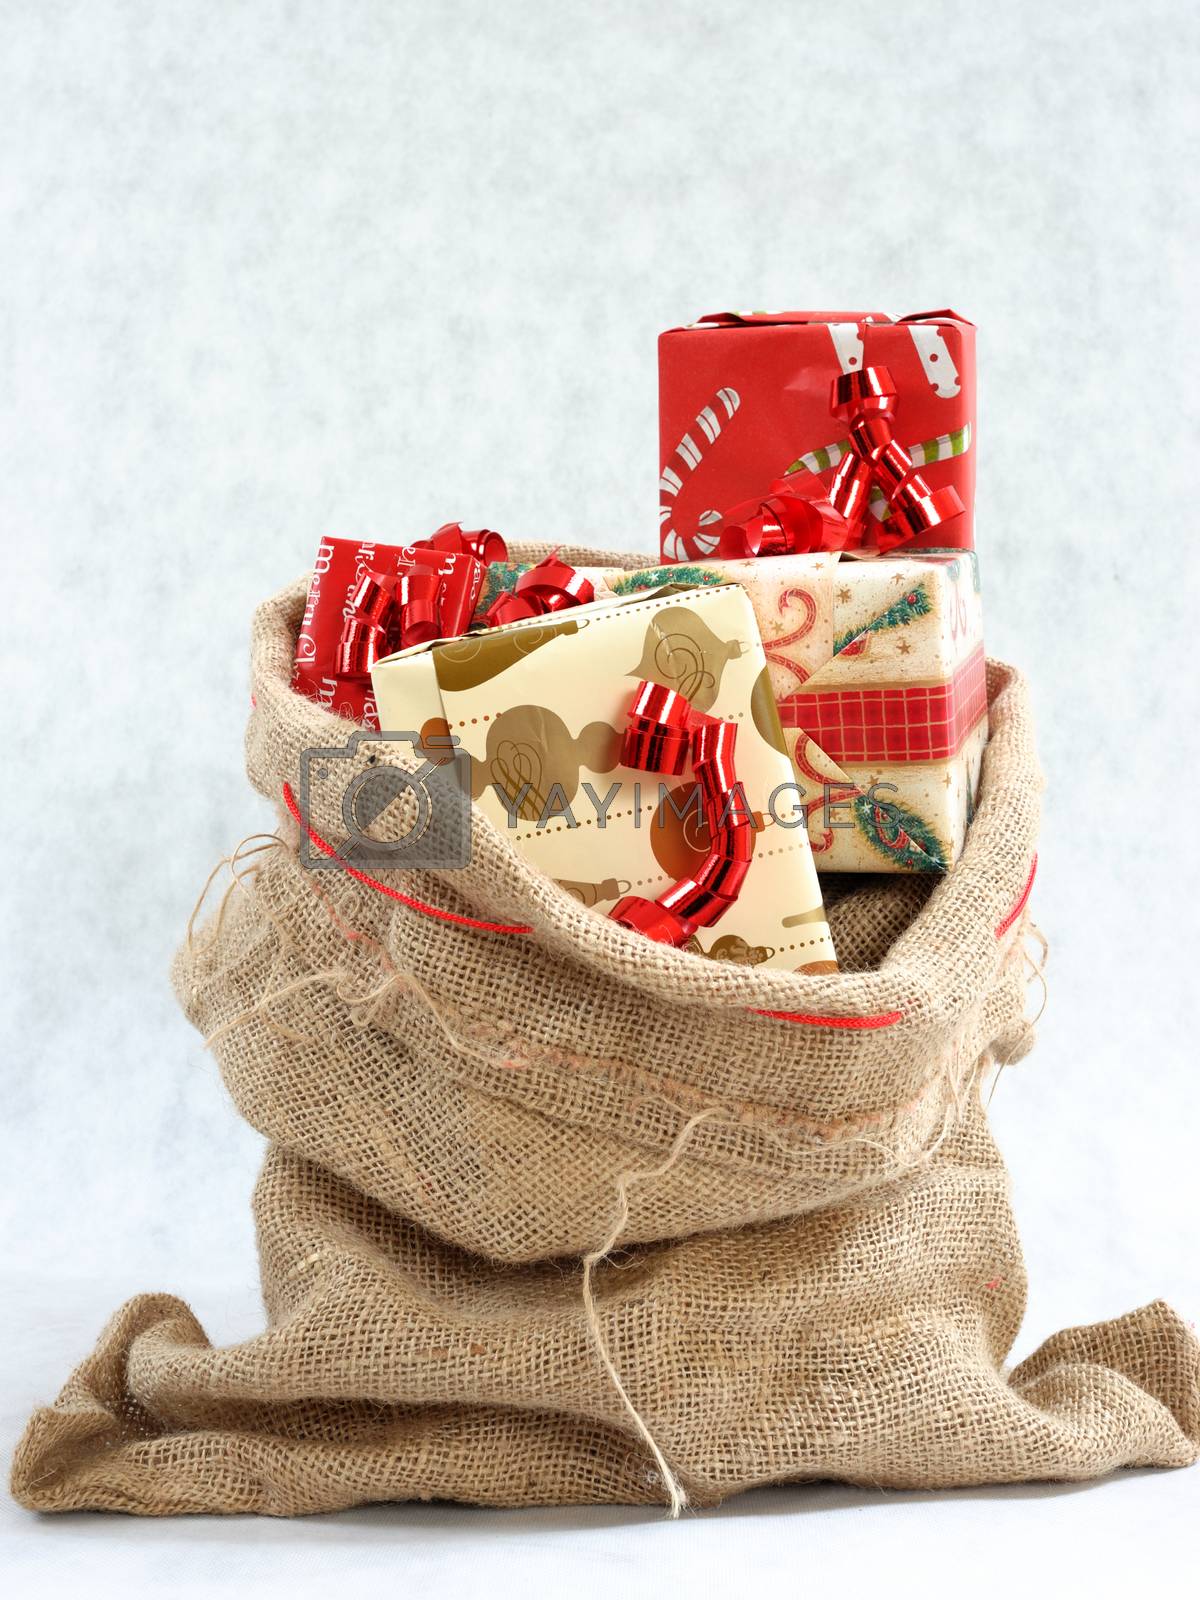 Royalty free image of An sack full of gifts. by francescomoufotografo